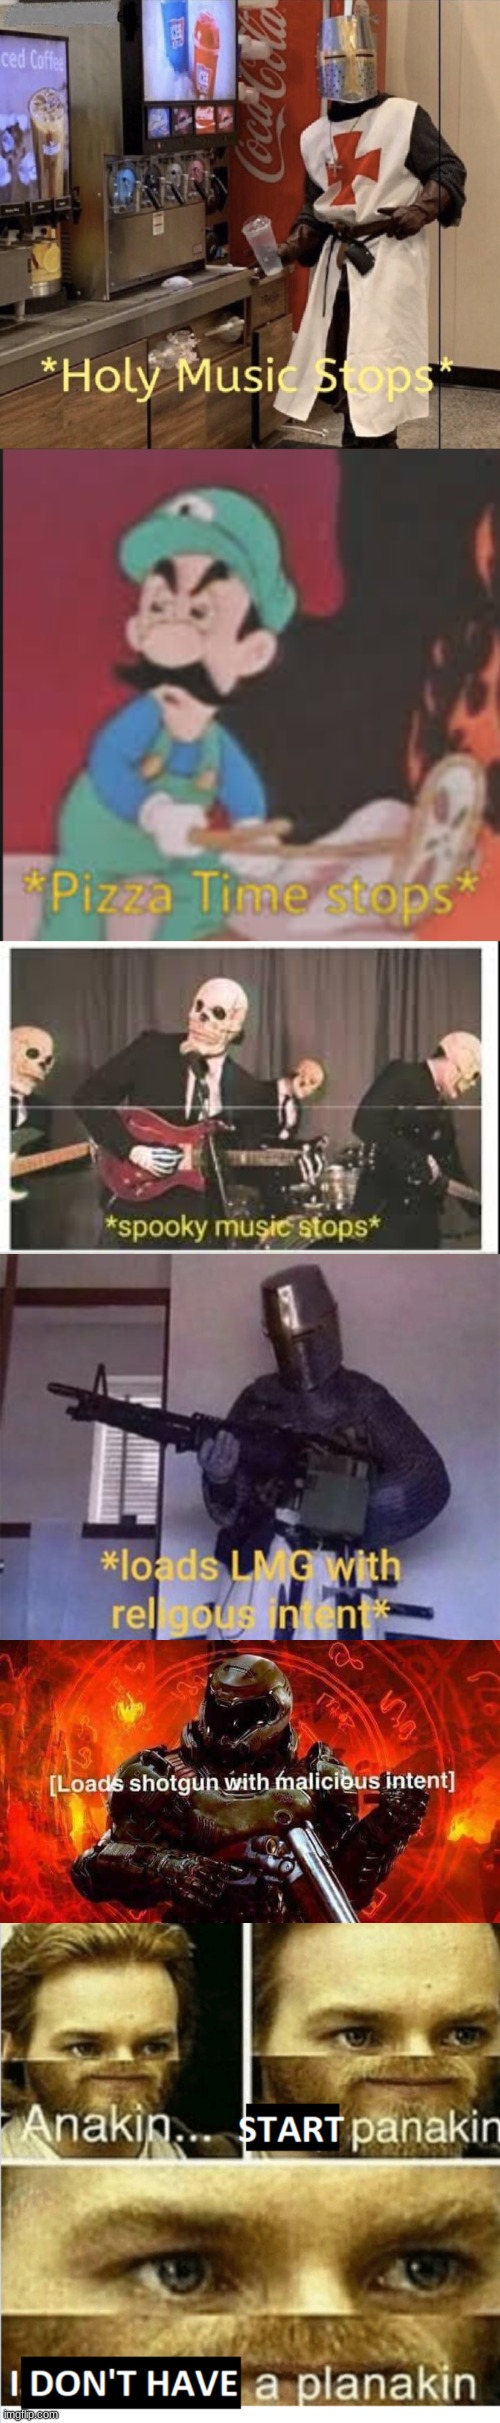 image tagged in holy music stops,pizza time stops,spooky music stops,loads lmg with religious intent,loads shotgun with malicious intent | made w/ Imgflip meme maker